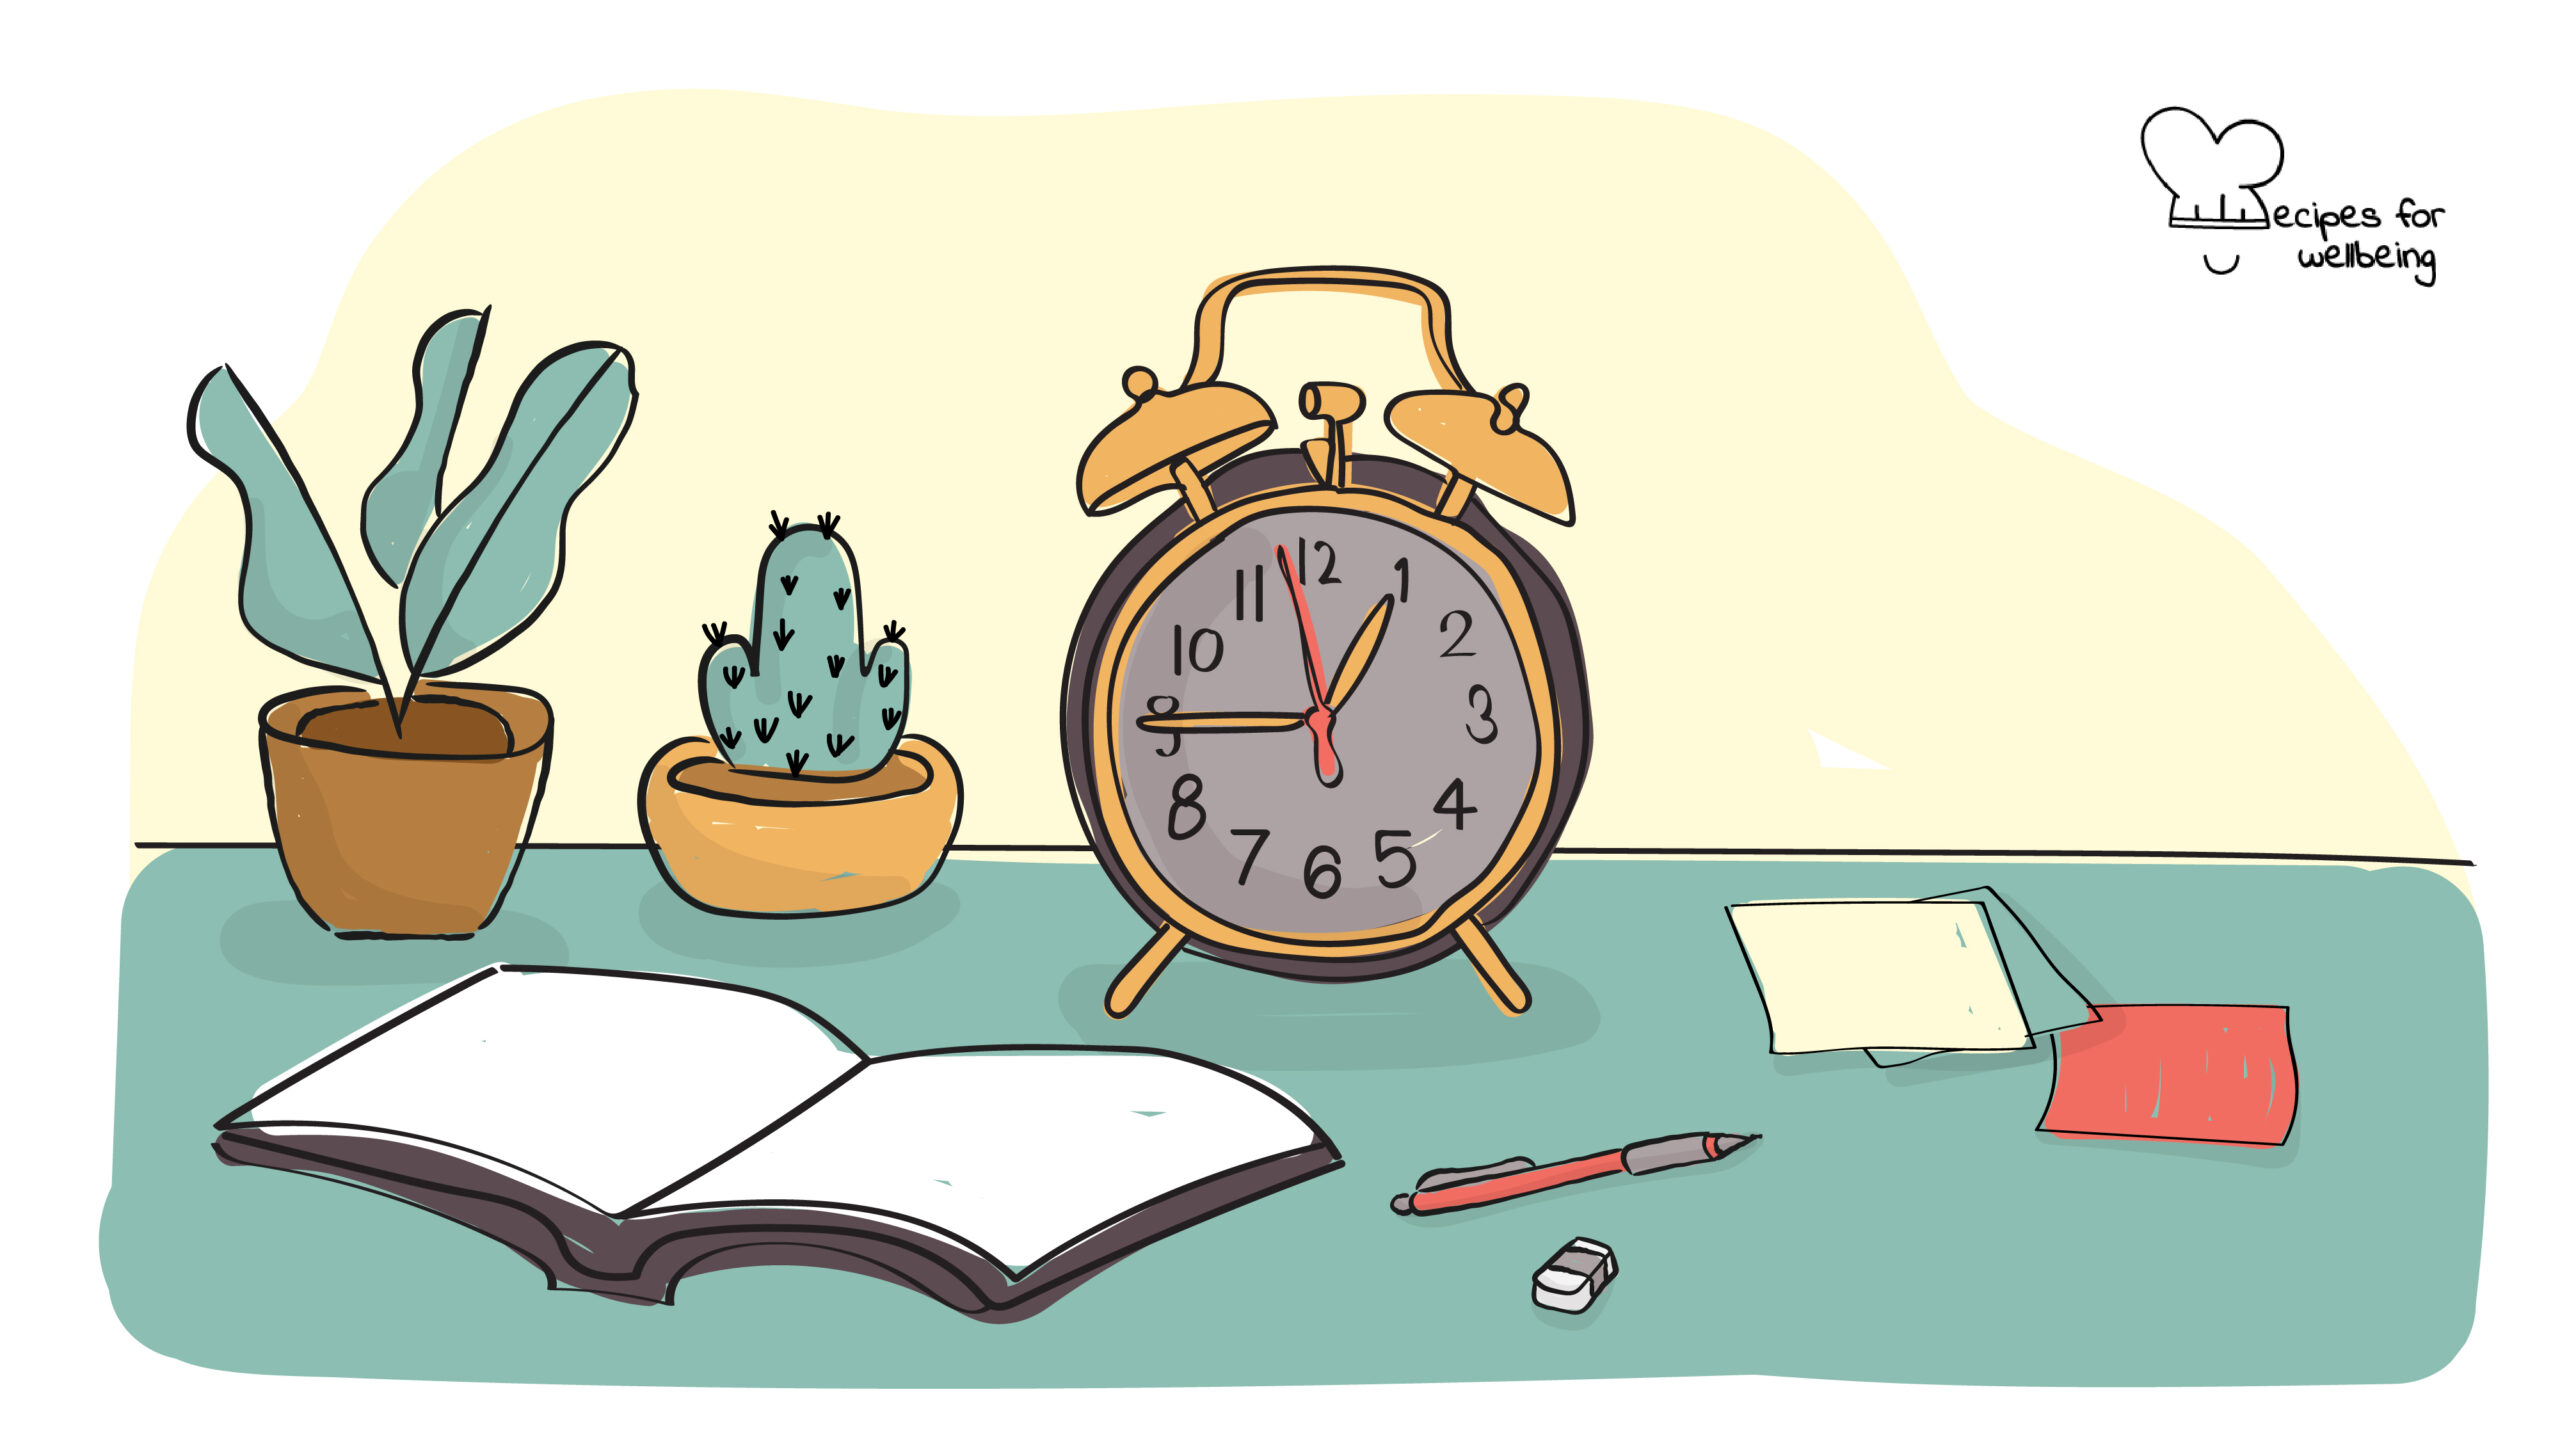 Illustration of an alarm on a table with a notebook, sticky notes, a pen, and a couple of table plants. © Recipes for Wellbeing